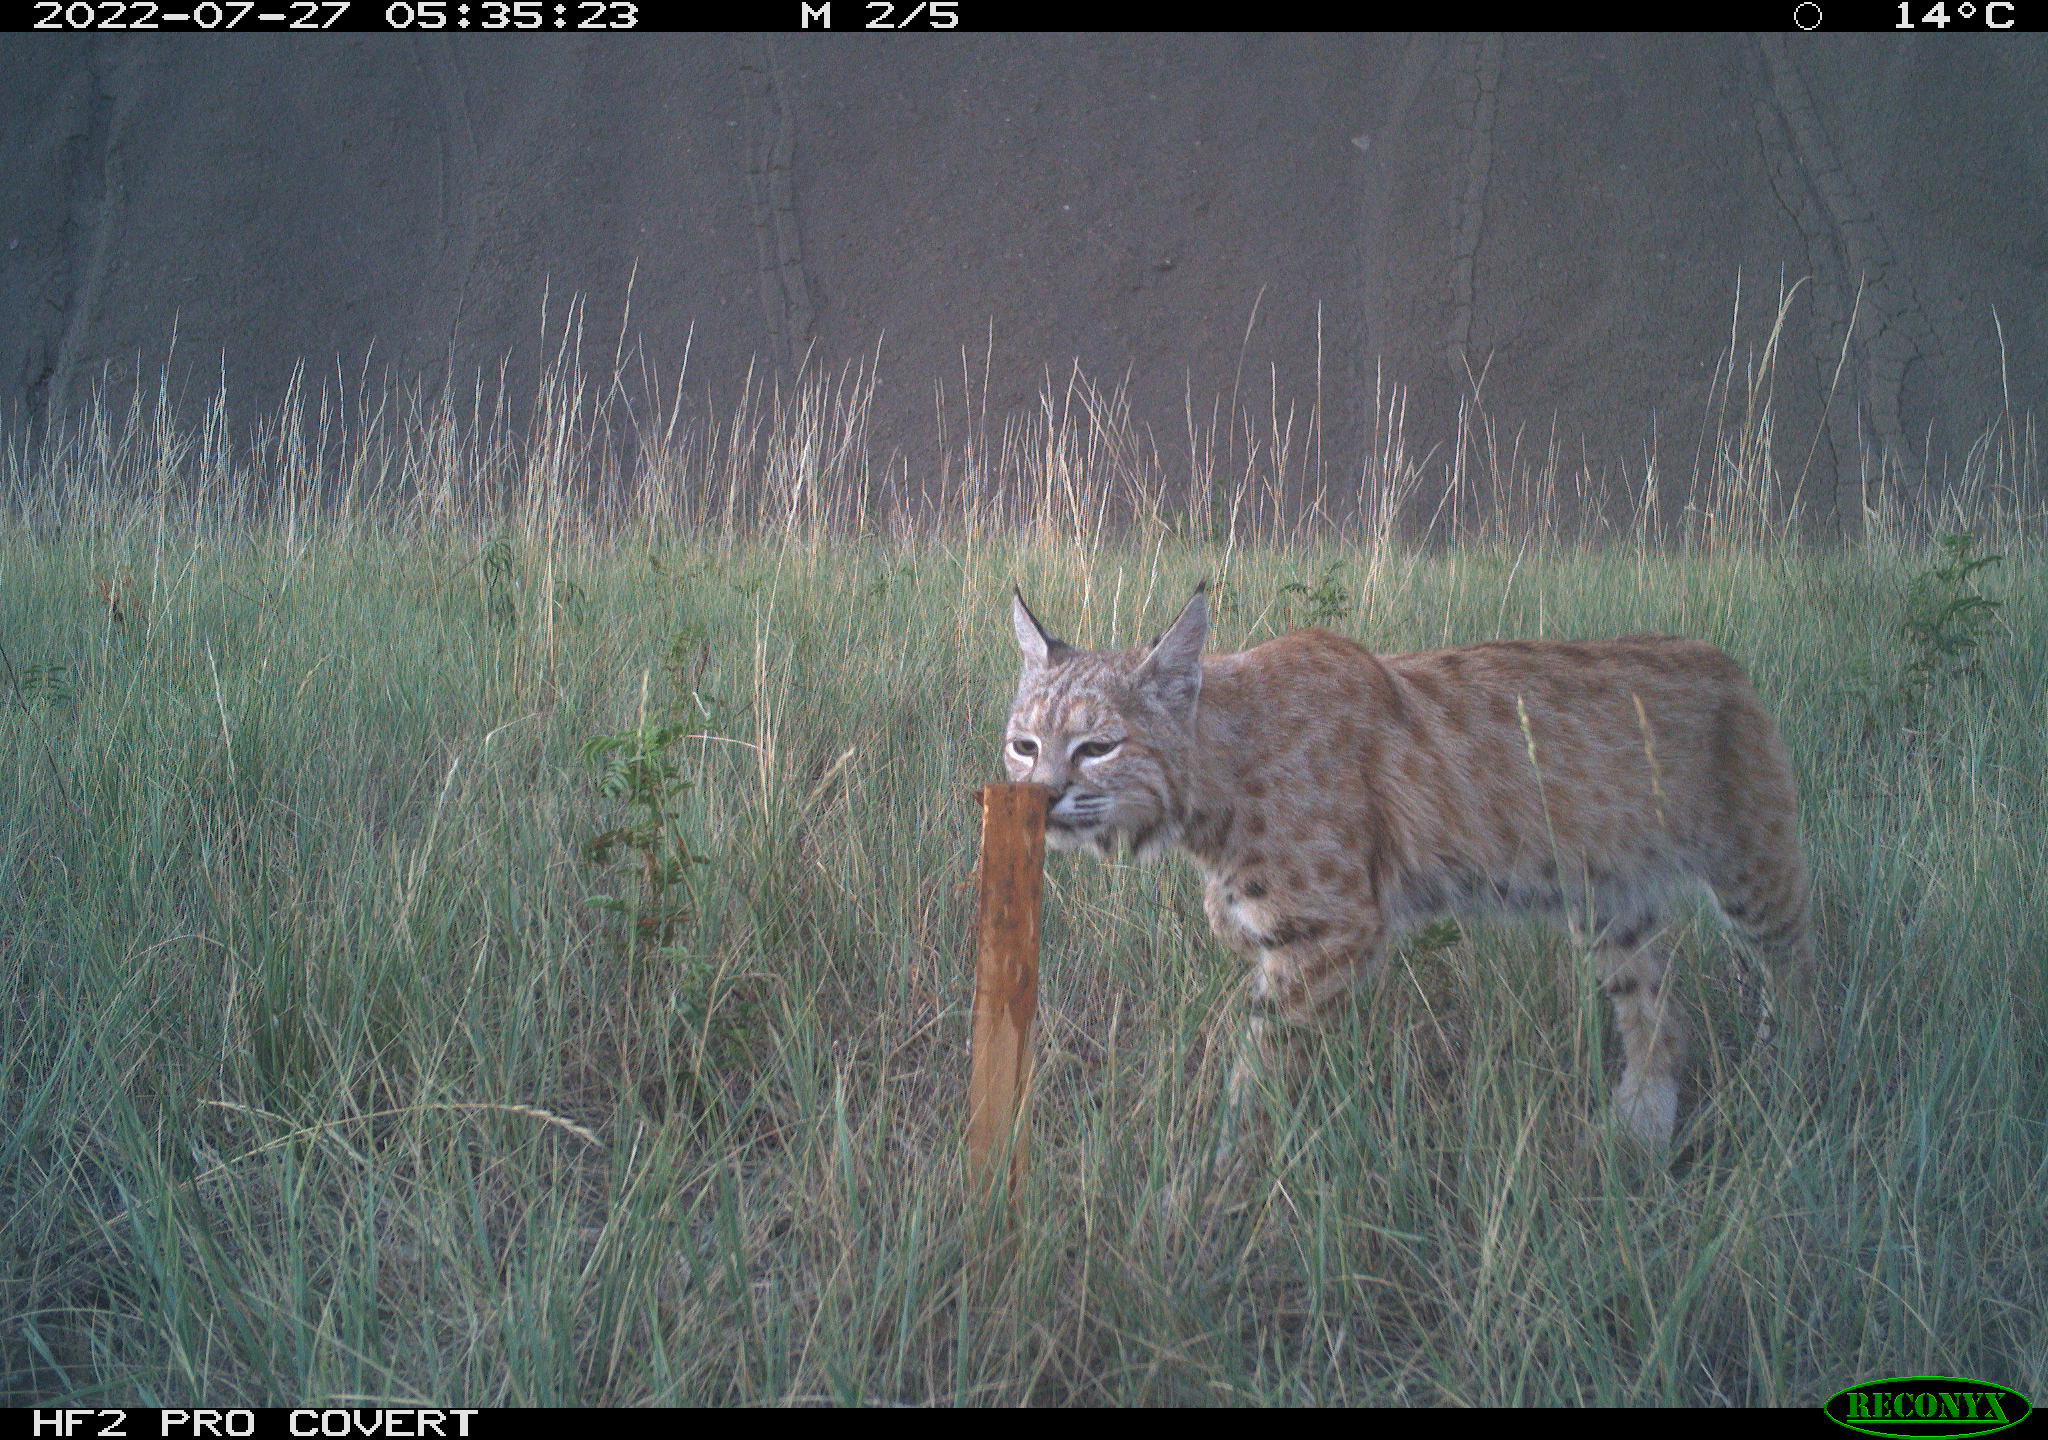 Photo of a bobcat in a field sniffing a lure. The lure is a wooden stake scented with a skunk smell. 